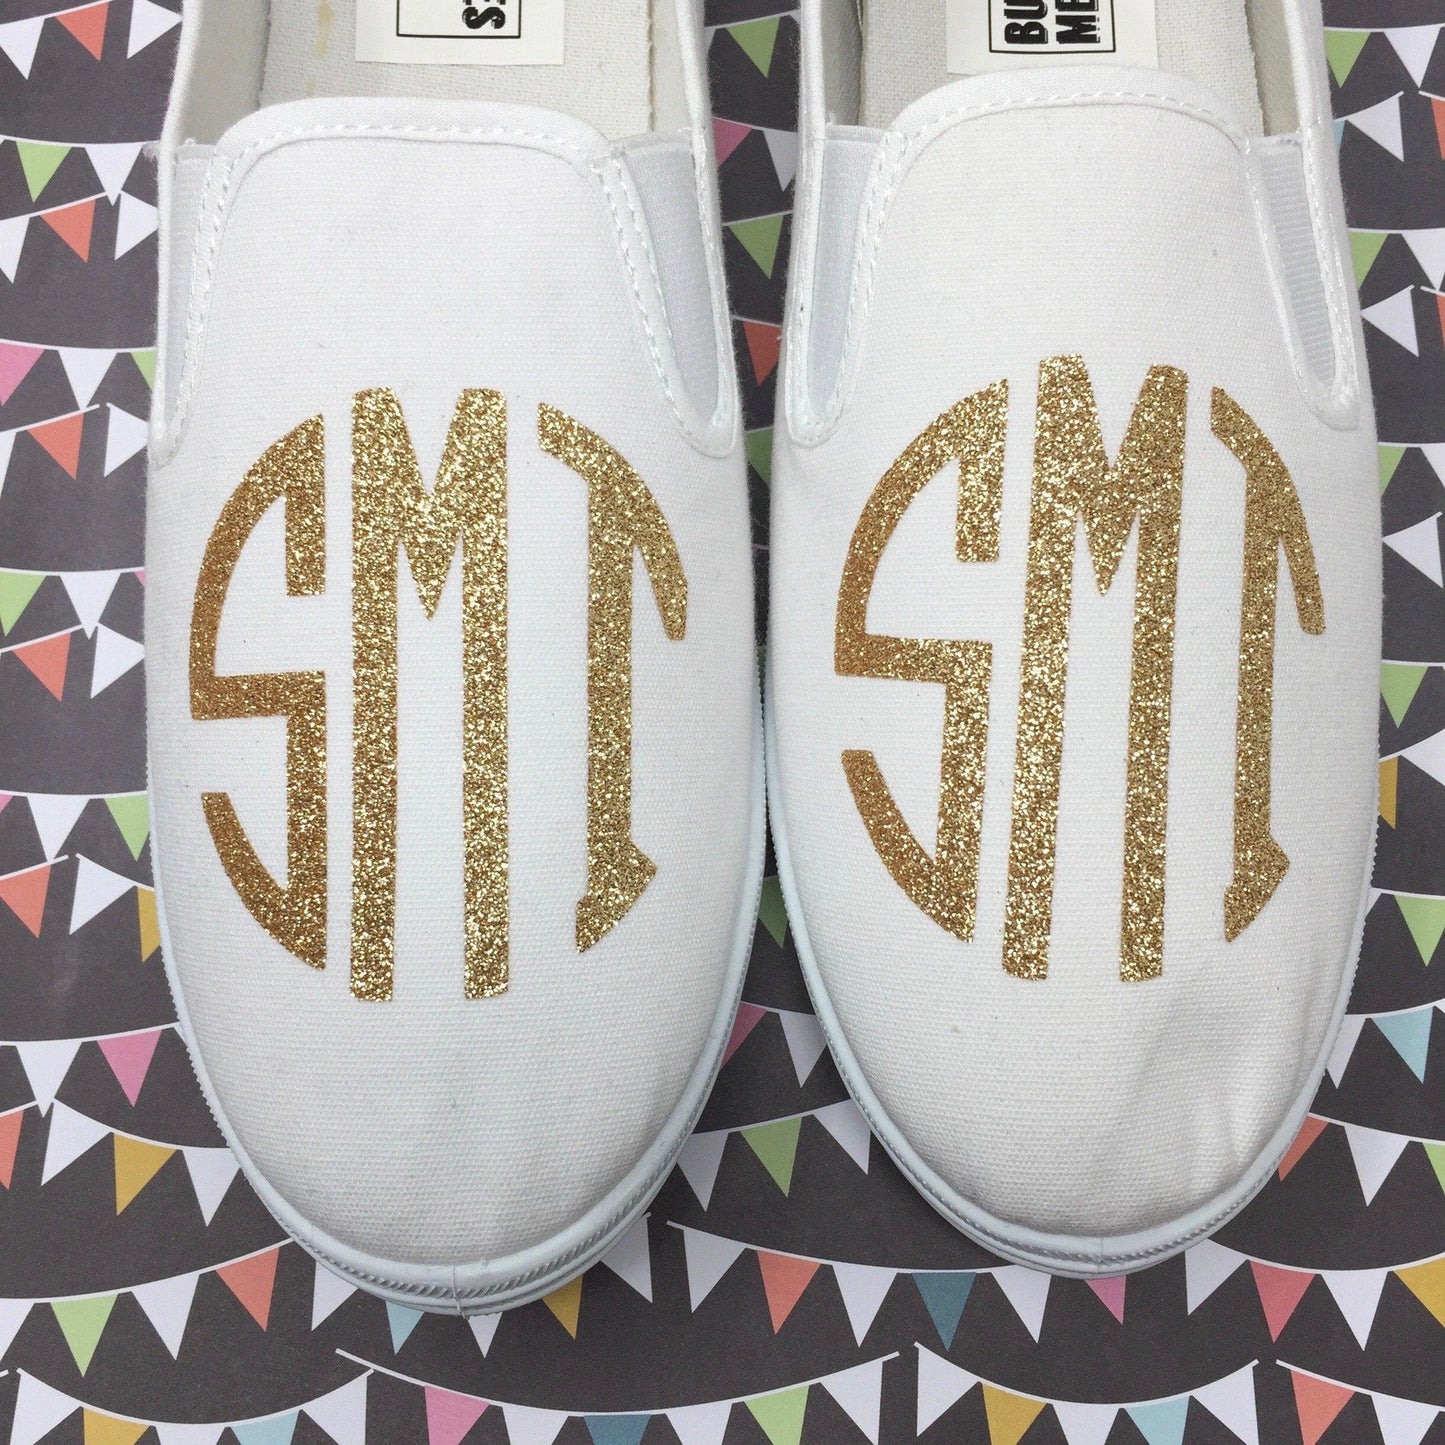 Customized Monogram Shoe-Shoes-ButterMakesMeHappy